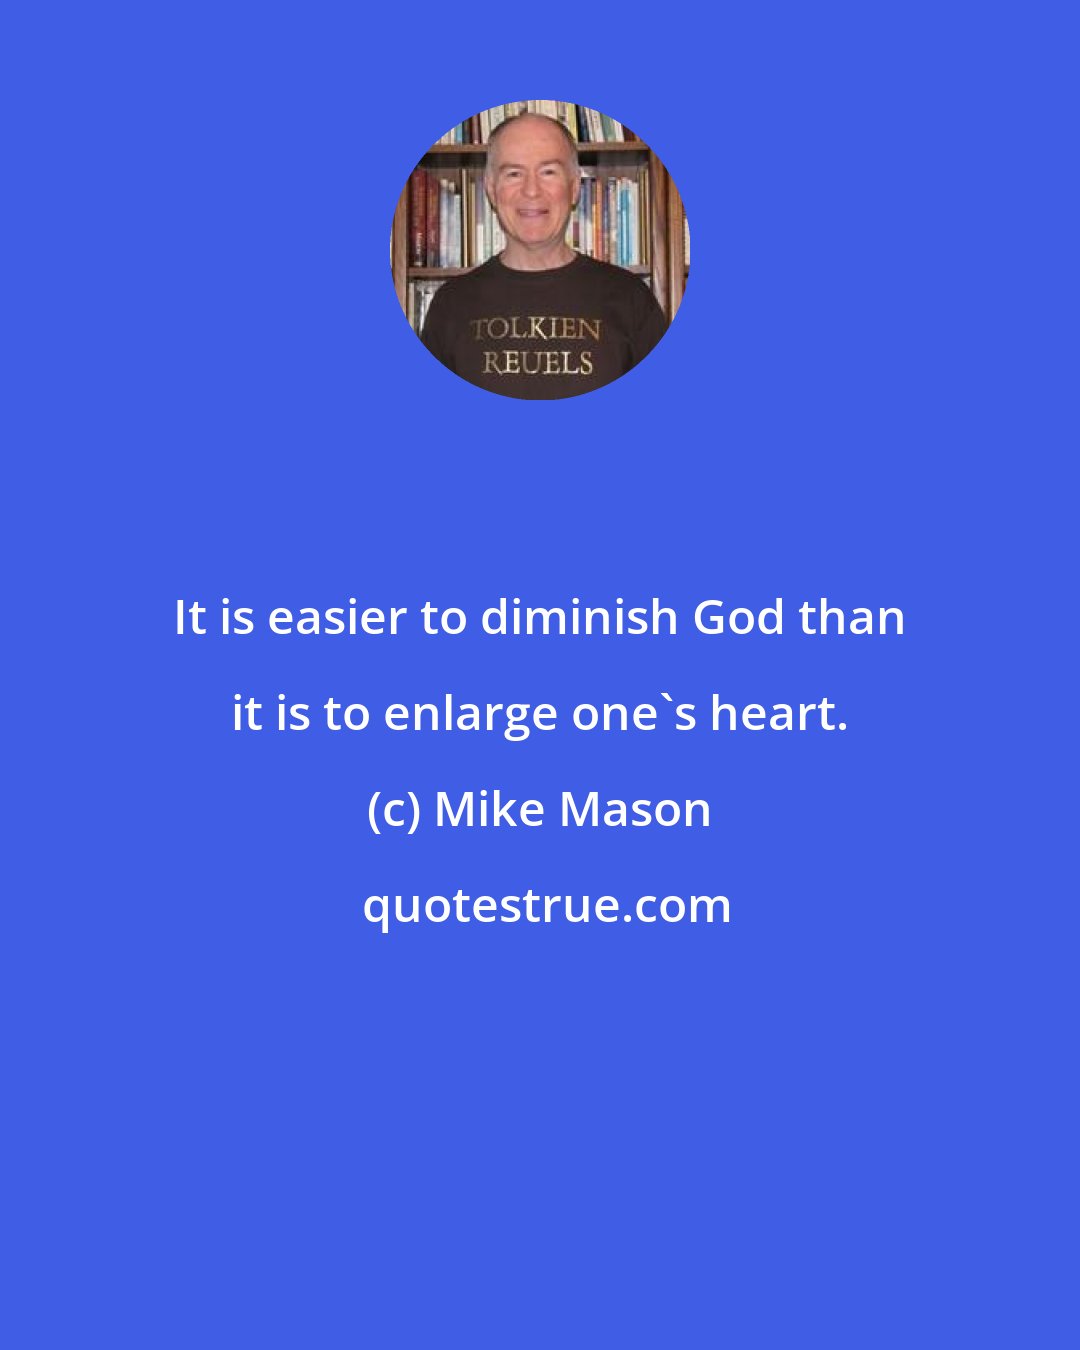 Mike Mason: It is easier to diminish God than it is to enlarge one's heart.